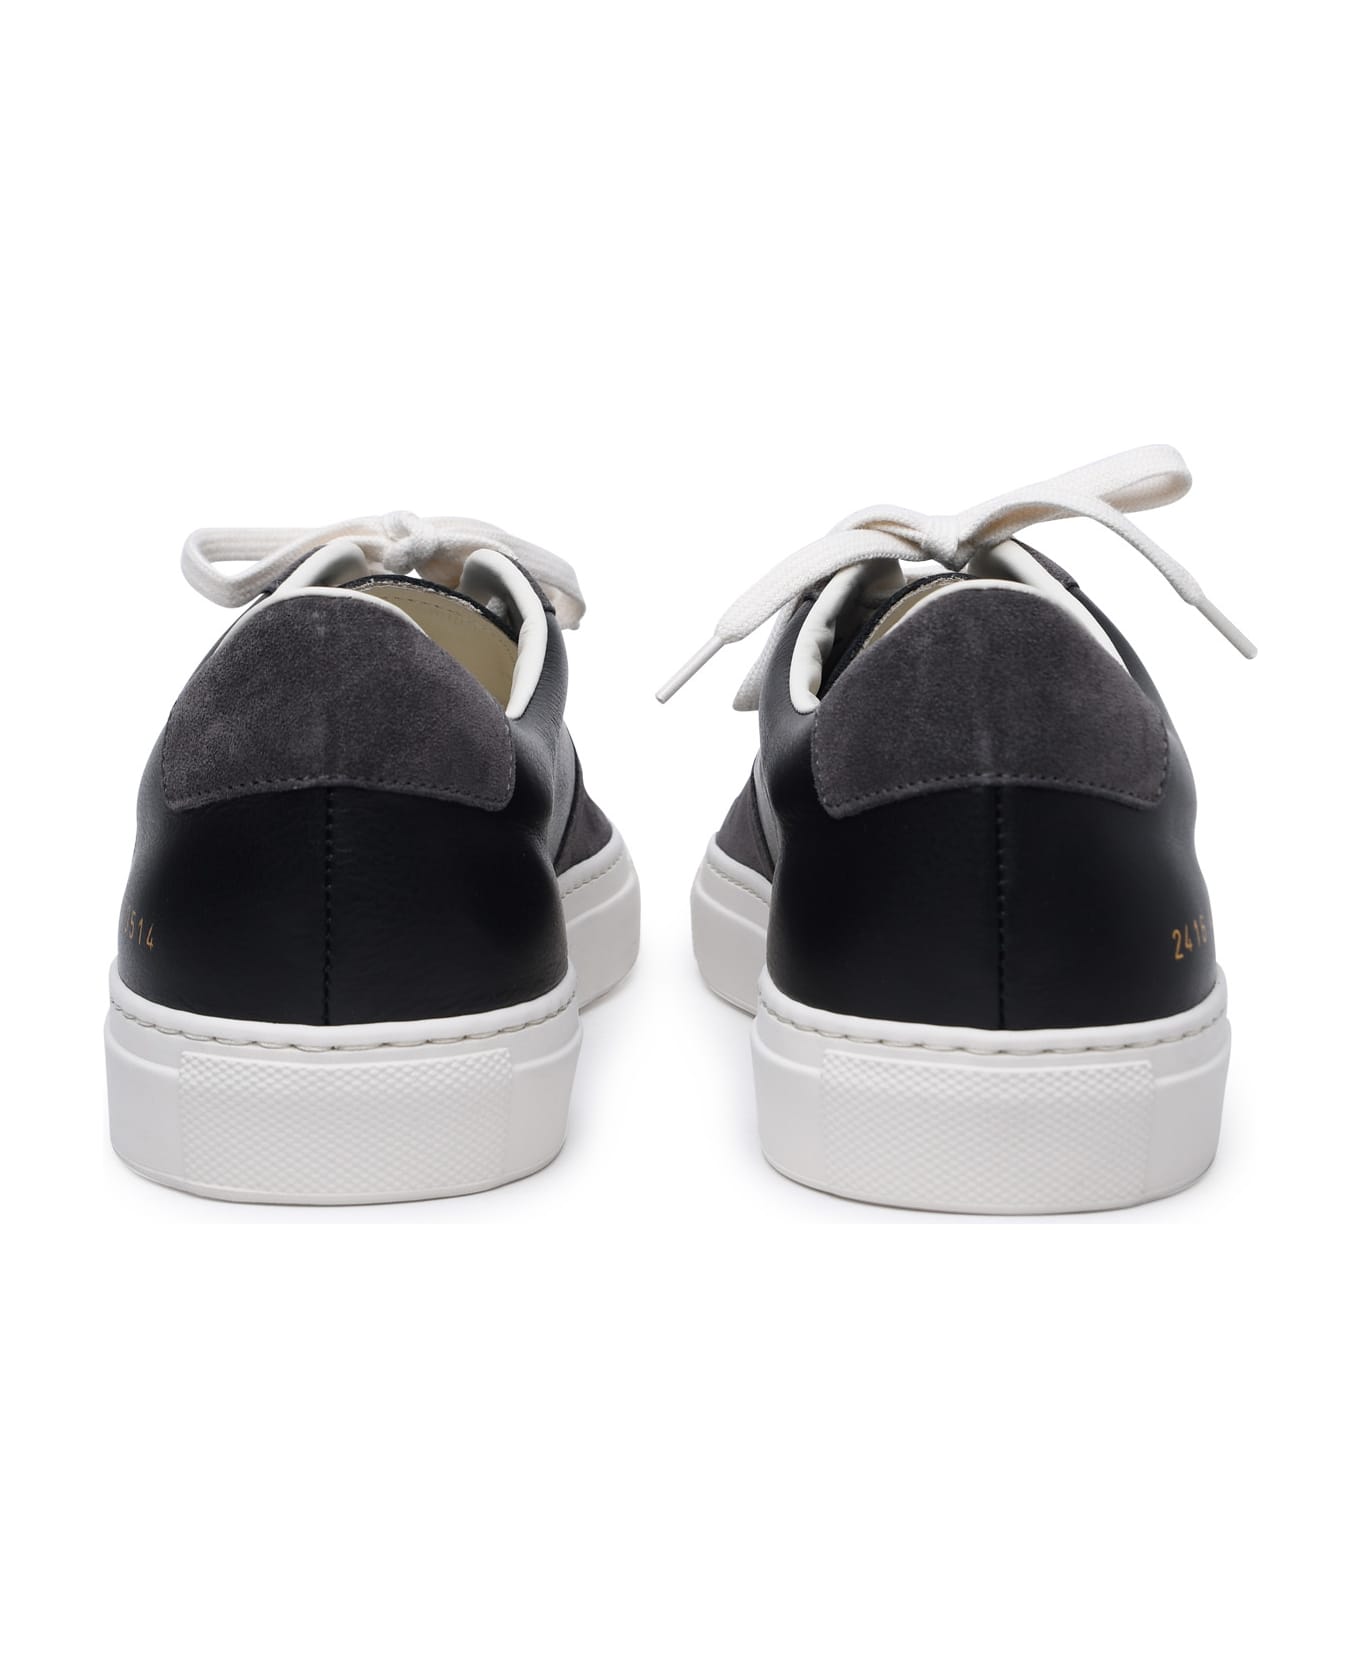 Common Projects Bball Duo Sneakers - Black スニーカー